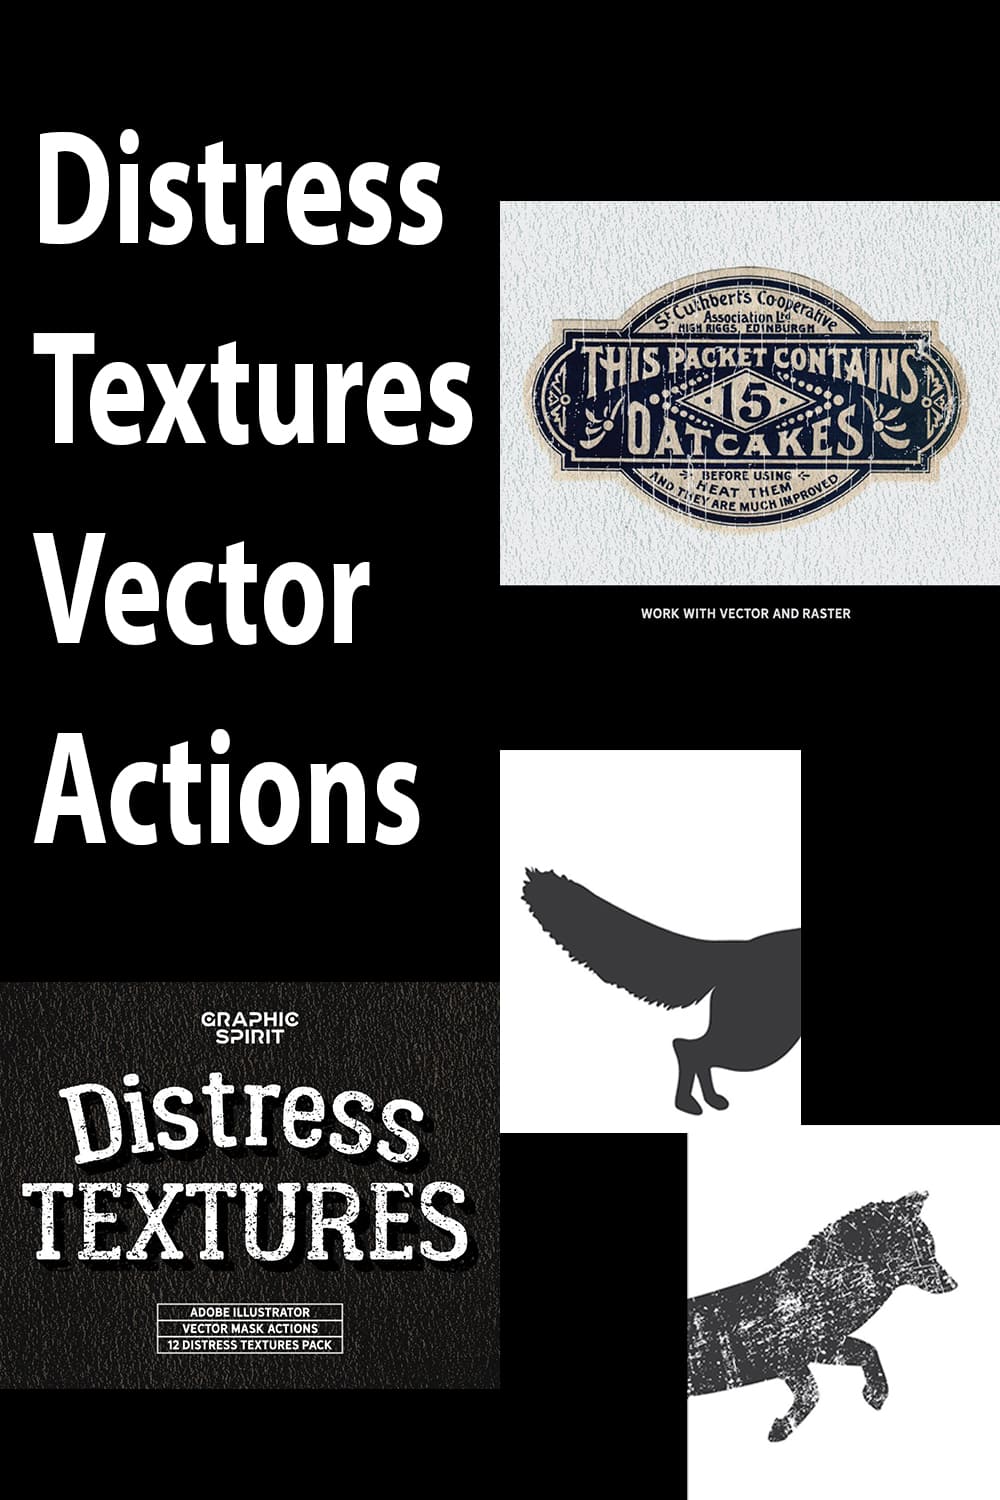 Distress Textures Vector Actions by MasterBundles Pinterest Collage Image.